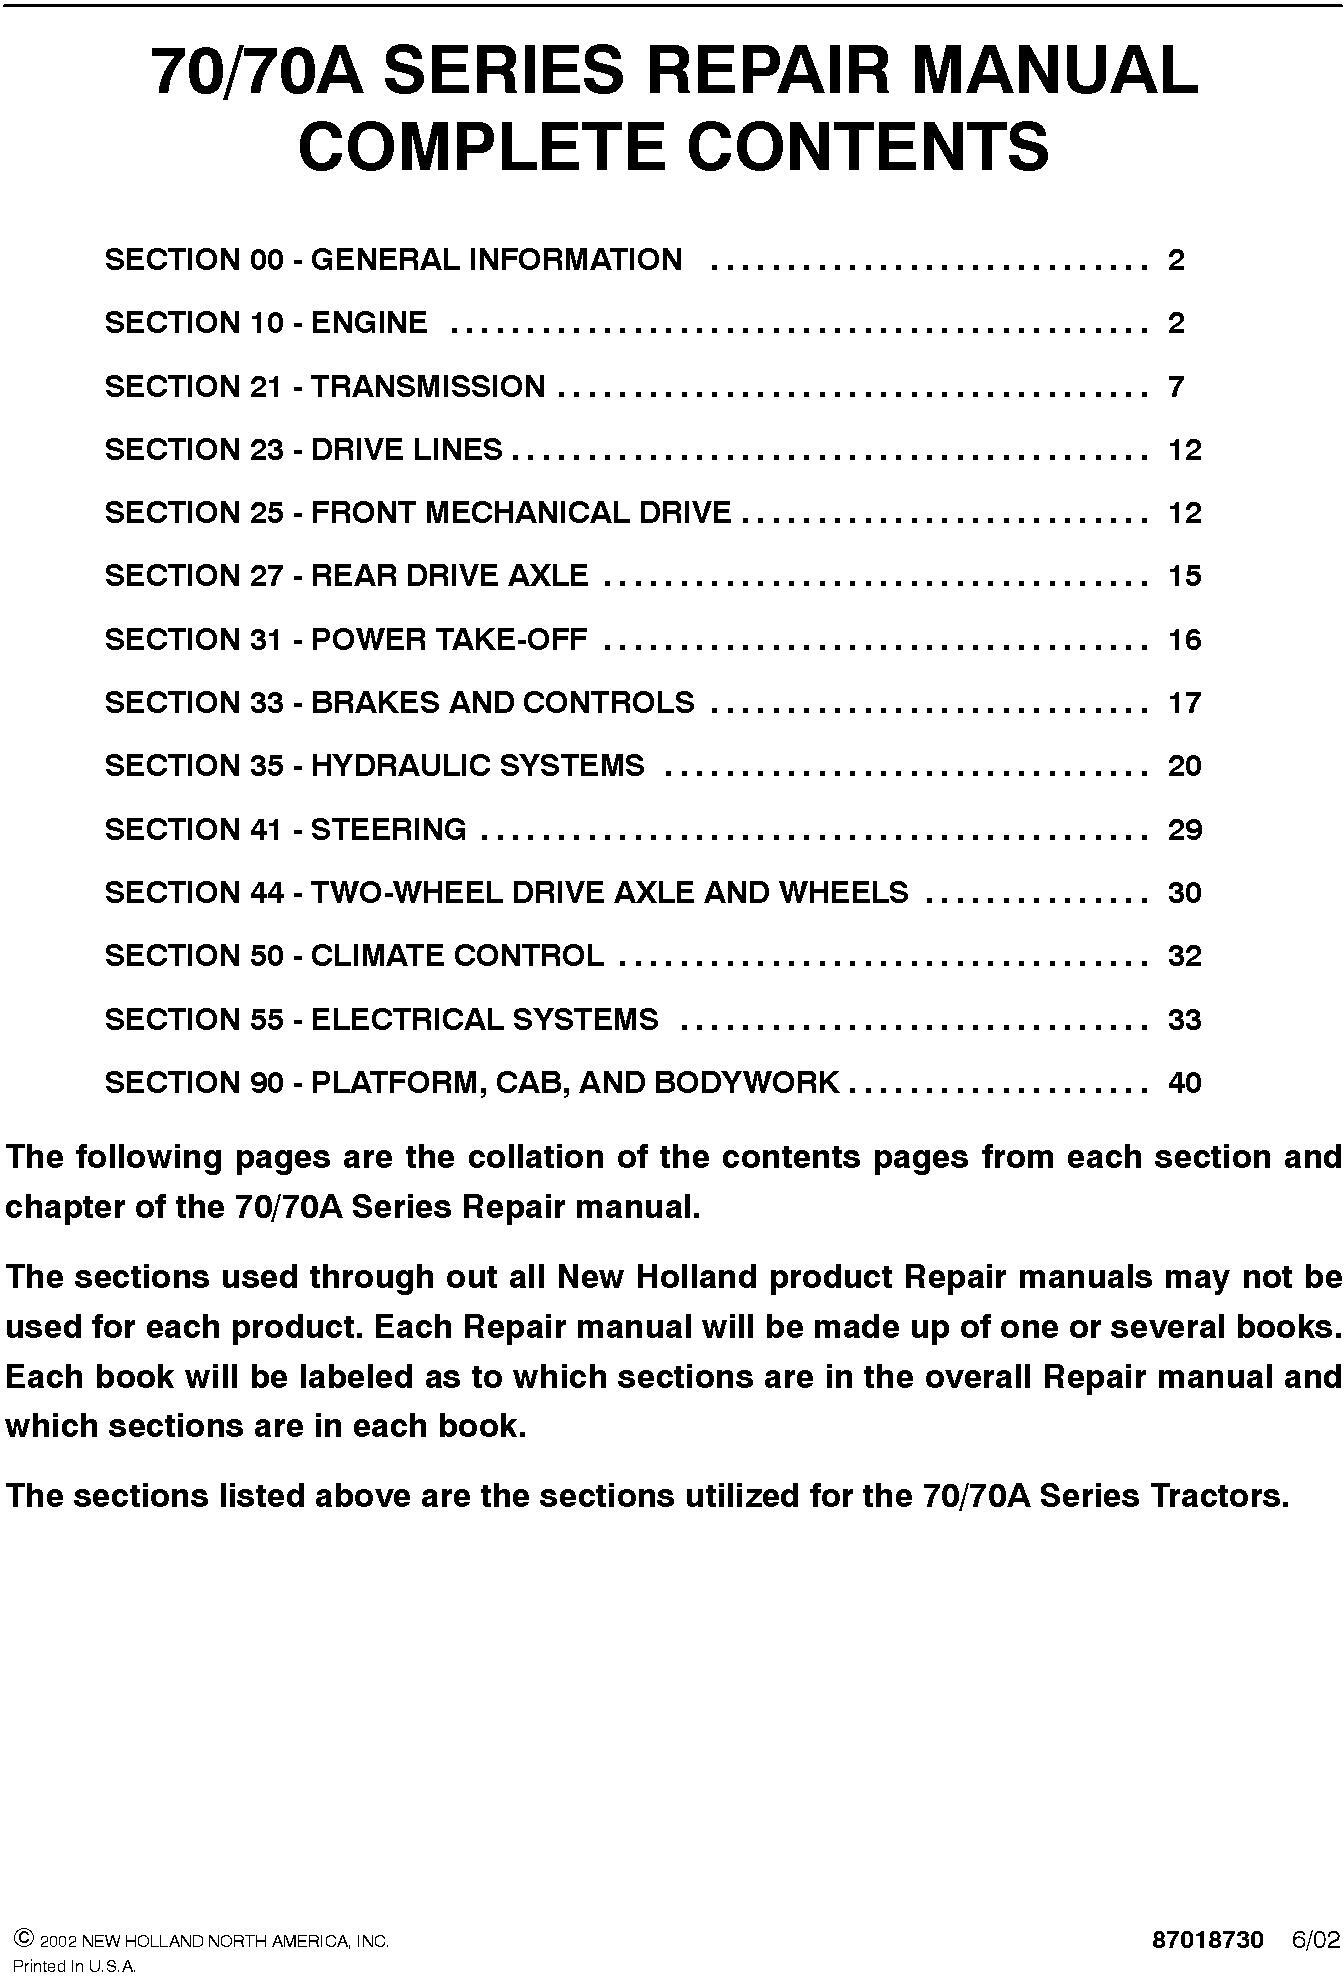 New Holland 8670, 8770, 8870, 8970, 8670A, 8770A, 8870A, 8970A Tractor Service Manual